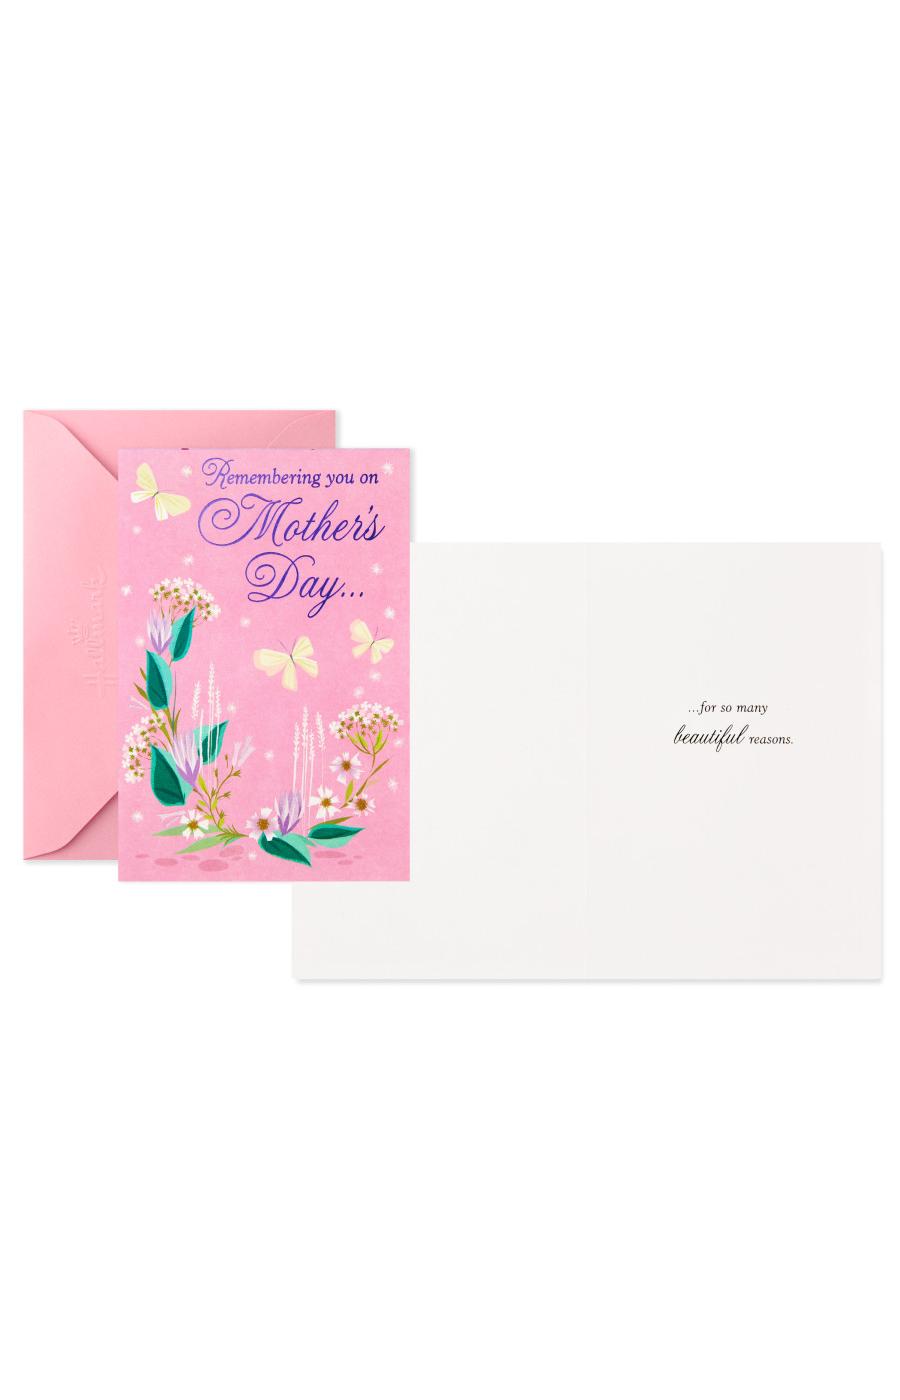 Hallmark Remembering You Assorted Mother's Day Cards with Envelopes - S6, S3; image 2 of 7